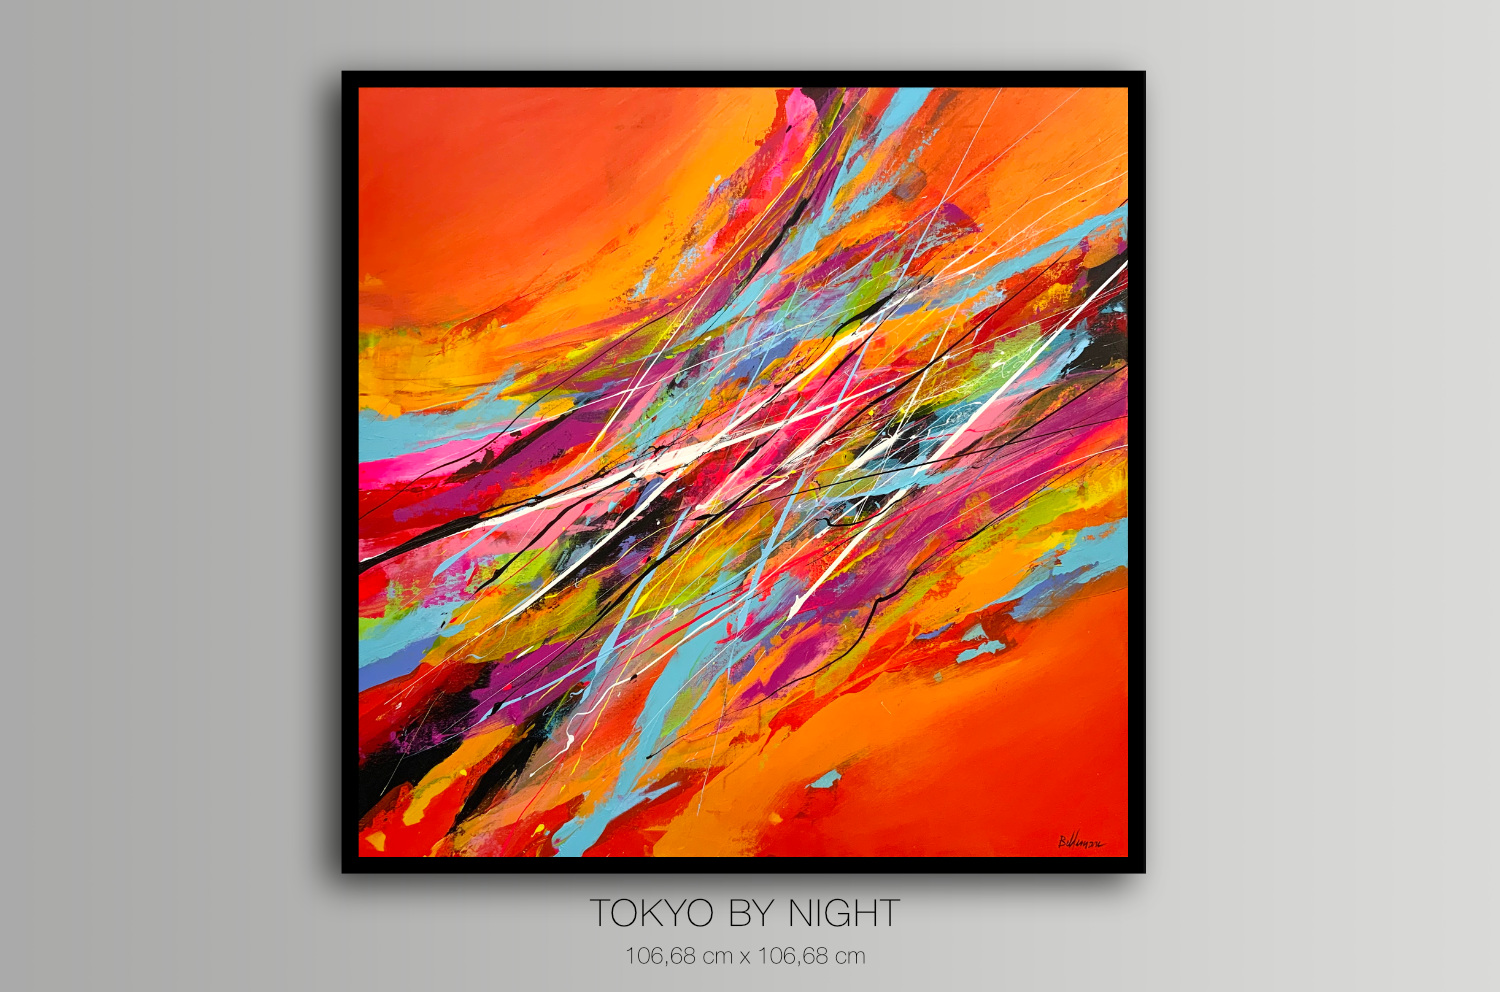 Tokyo by Night - Featured